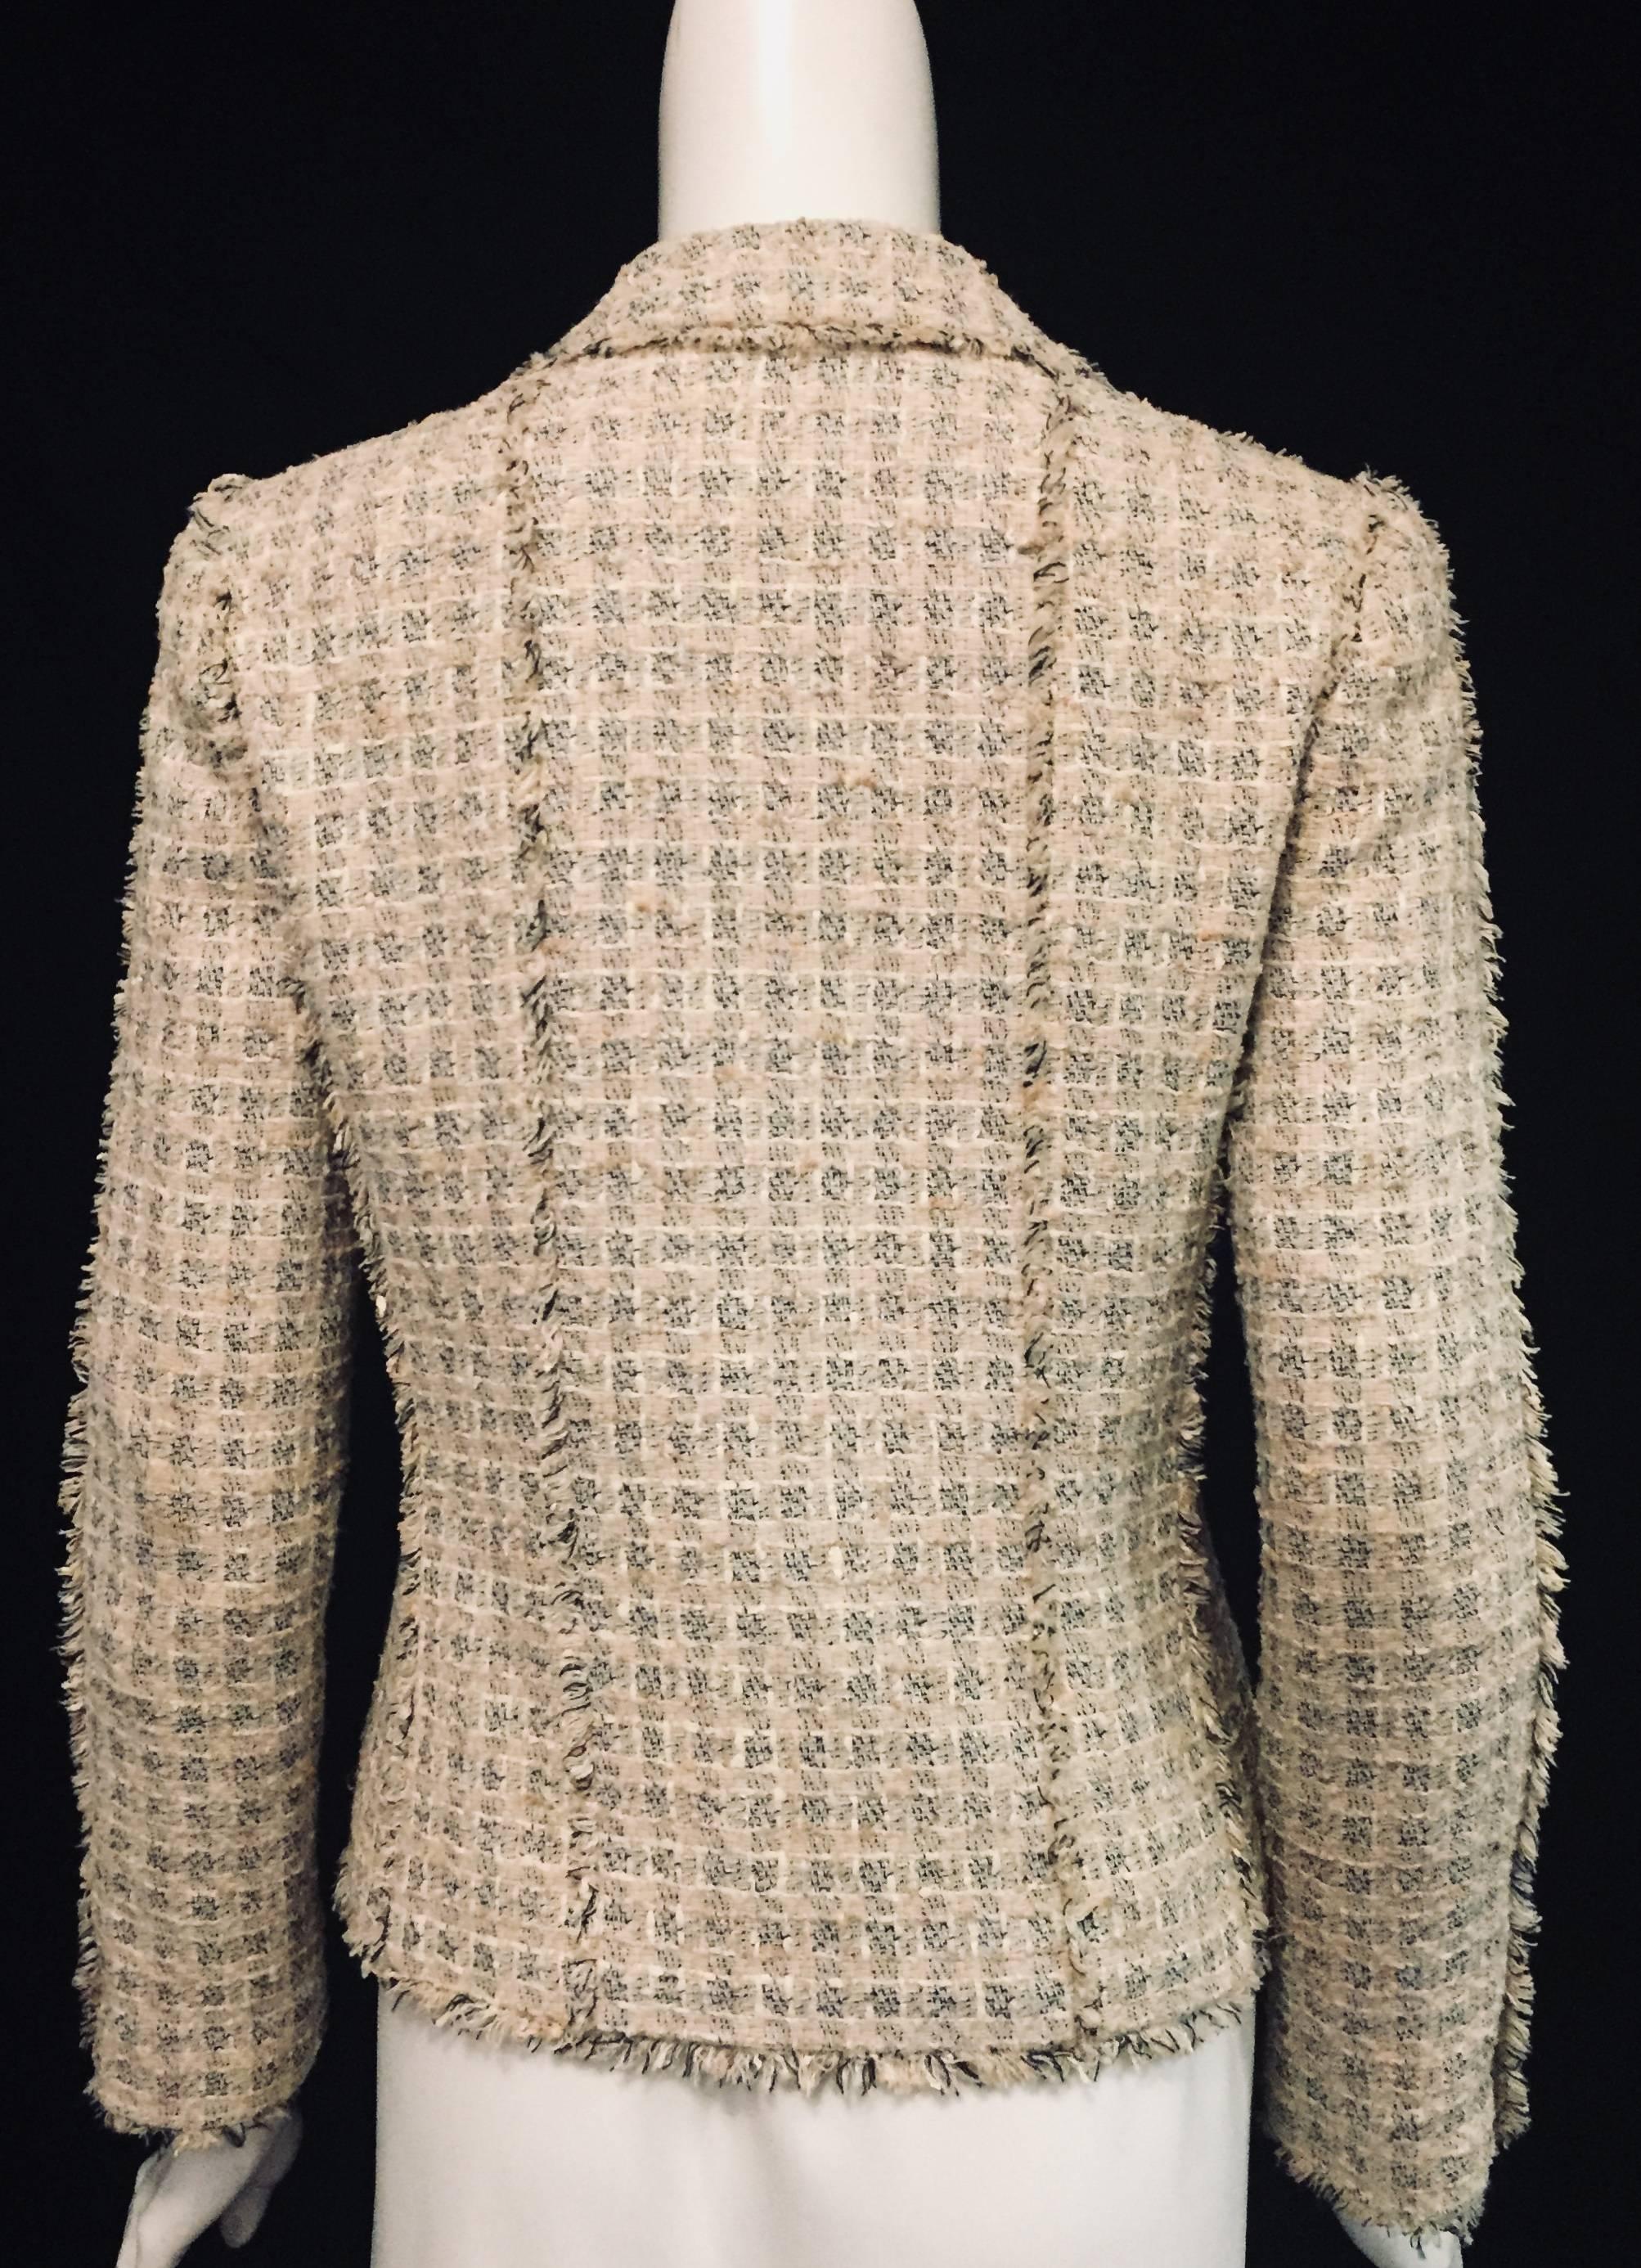 Chanel Spring Tweed Check Jacket With Fringe Trim  In Excellent Condition For Sale In Palm Beach, FL